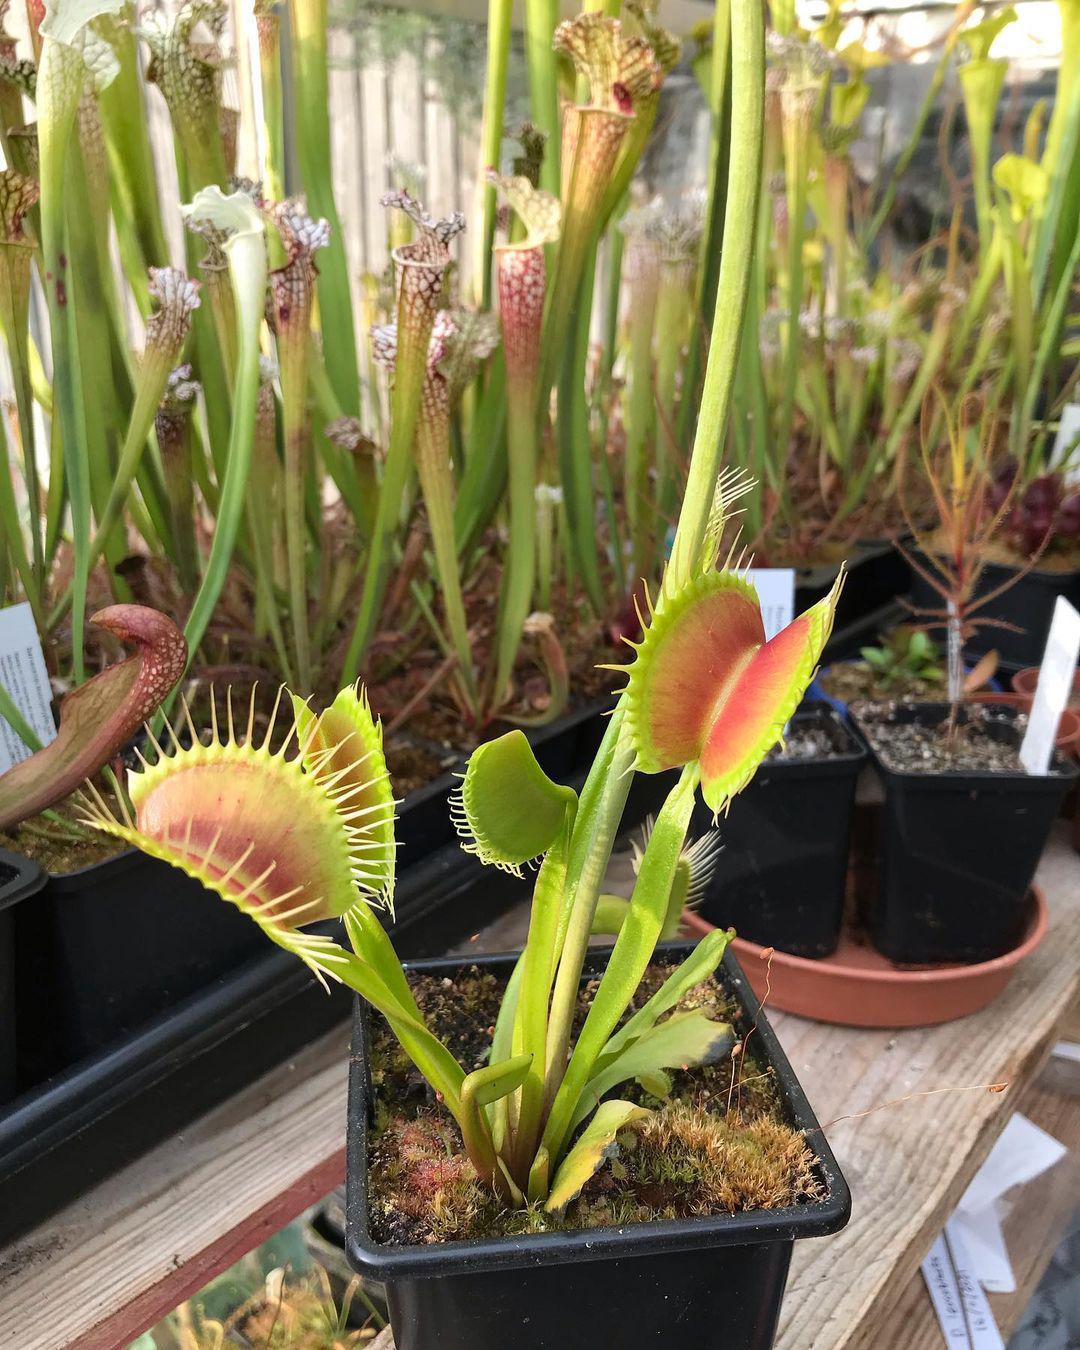 How big can Venus flytraps get?” and other FAQs